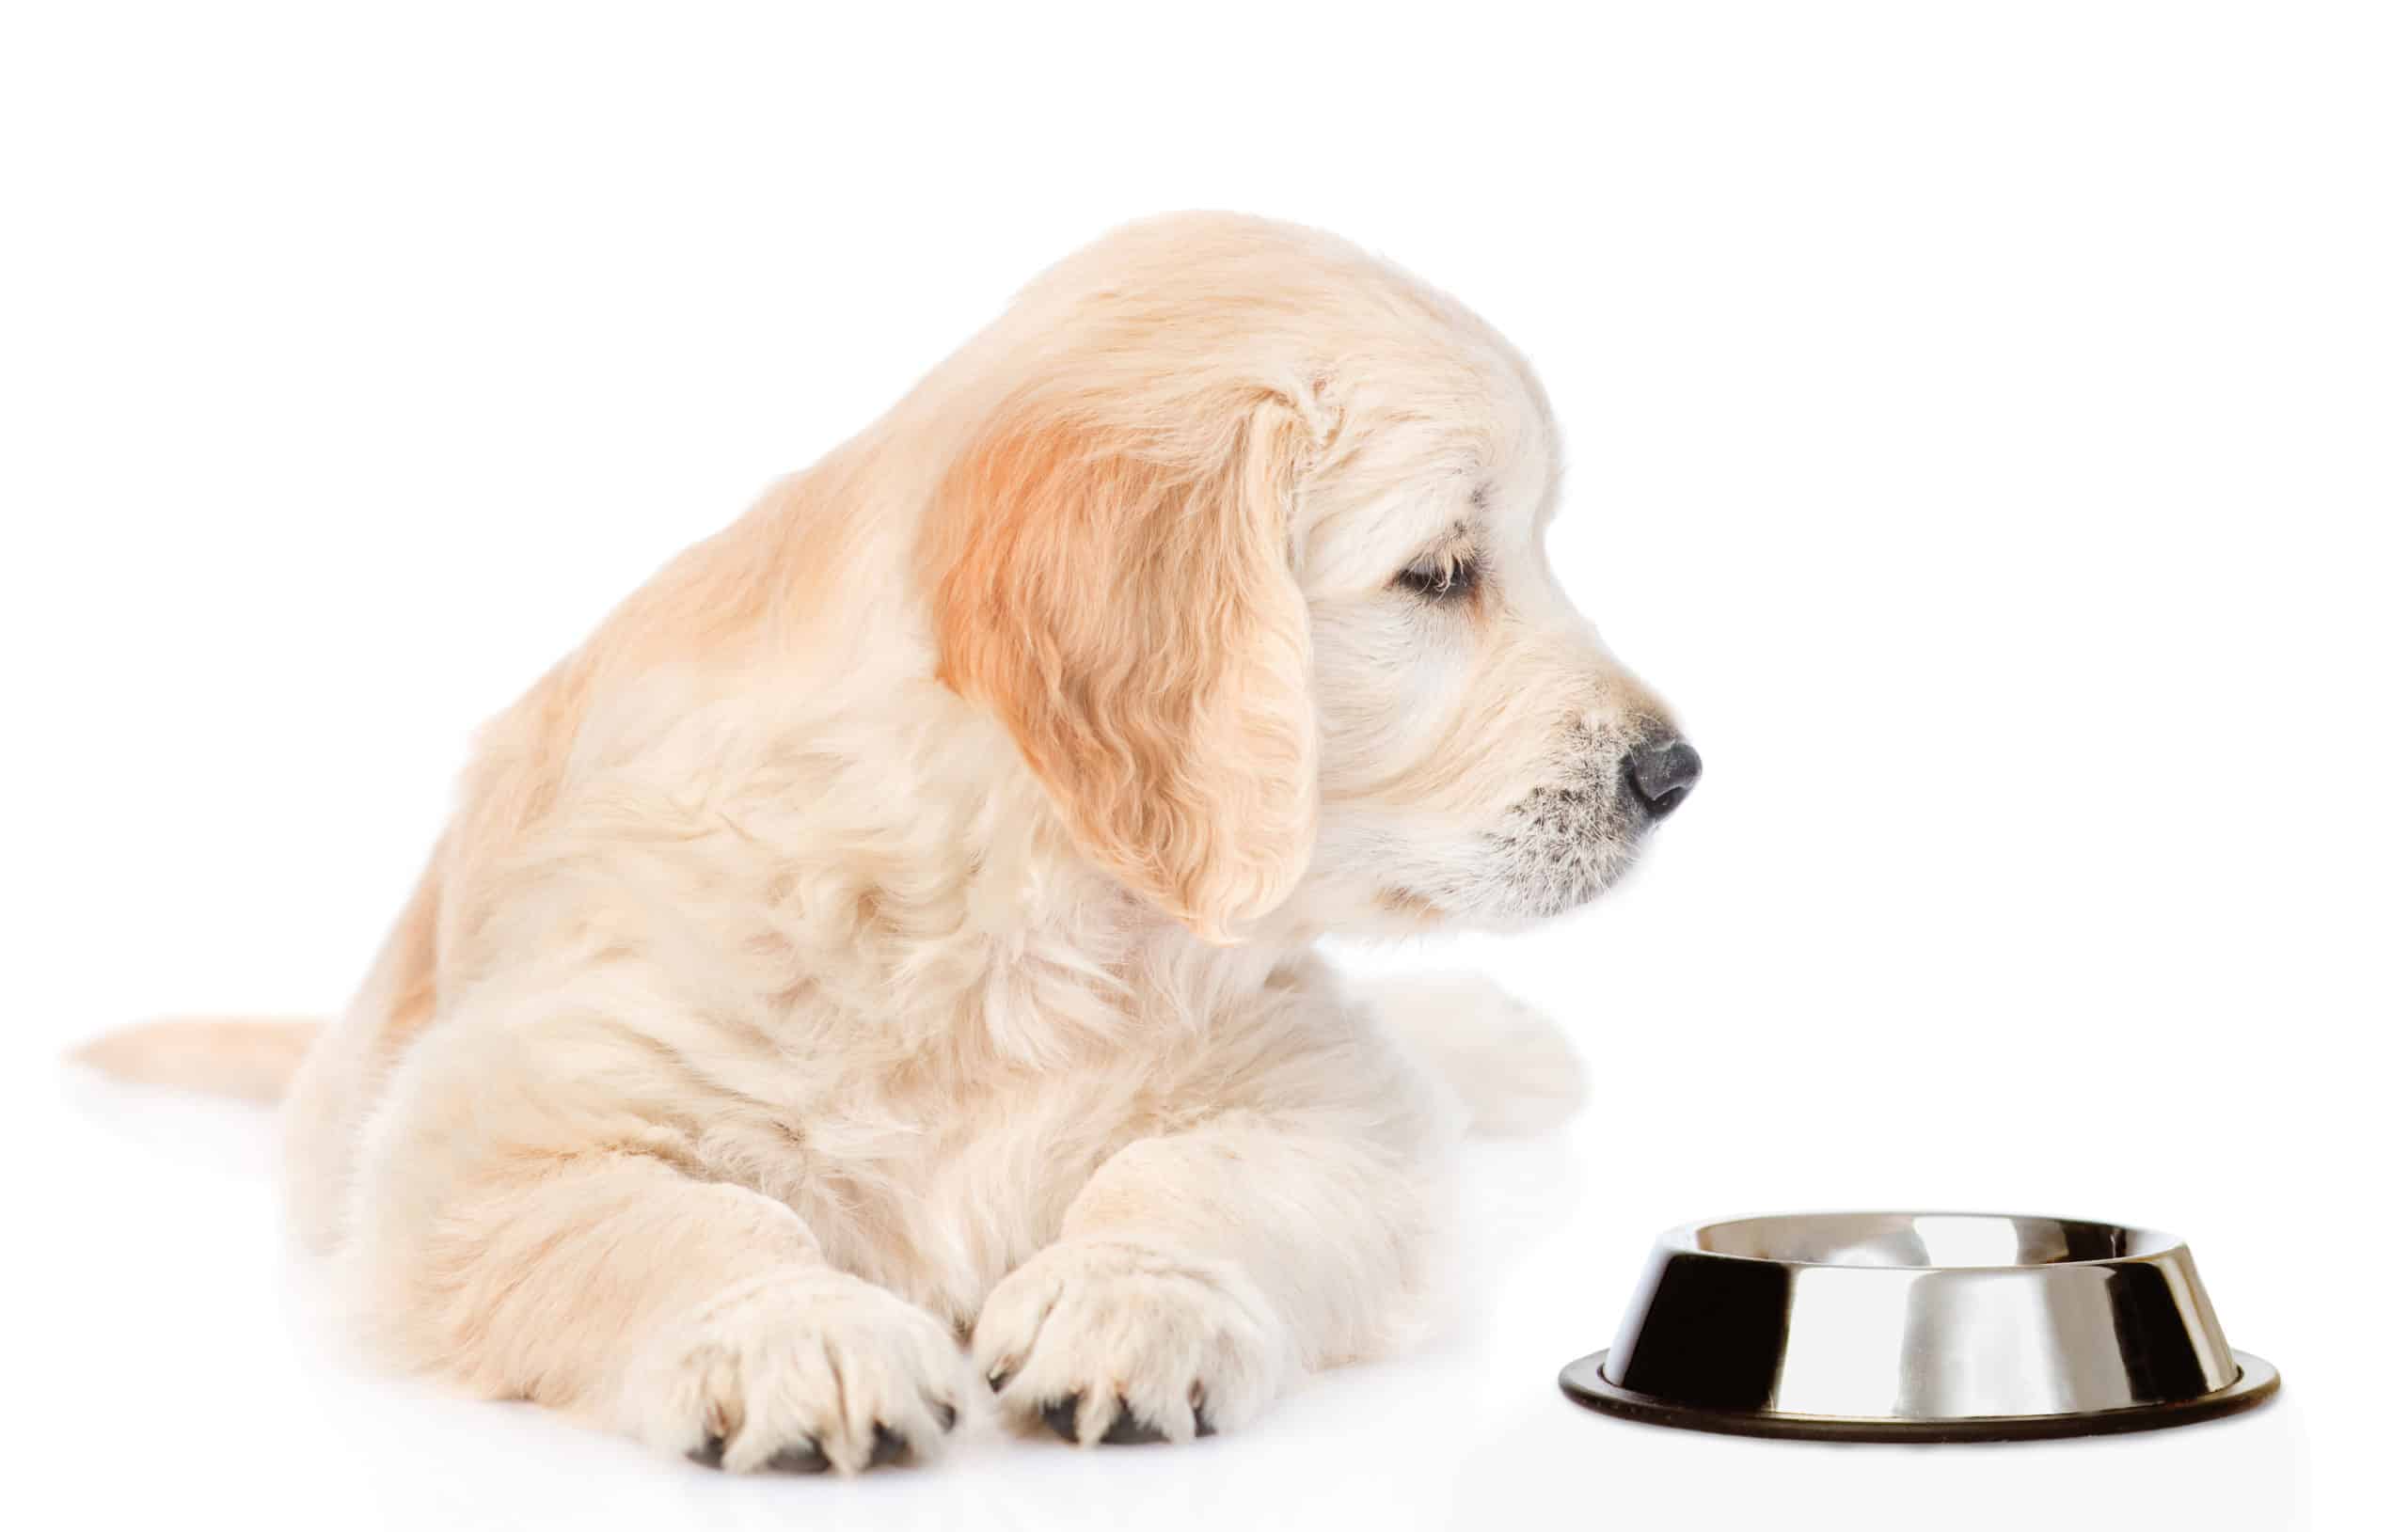 Why does my dog not poop after eating?